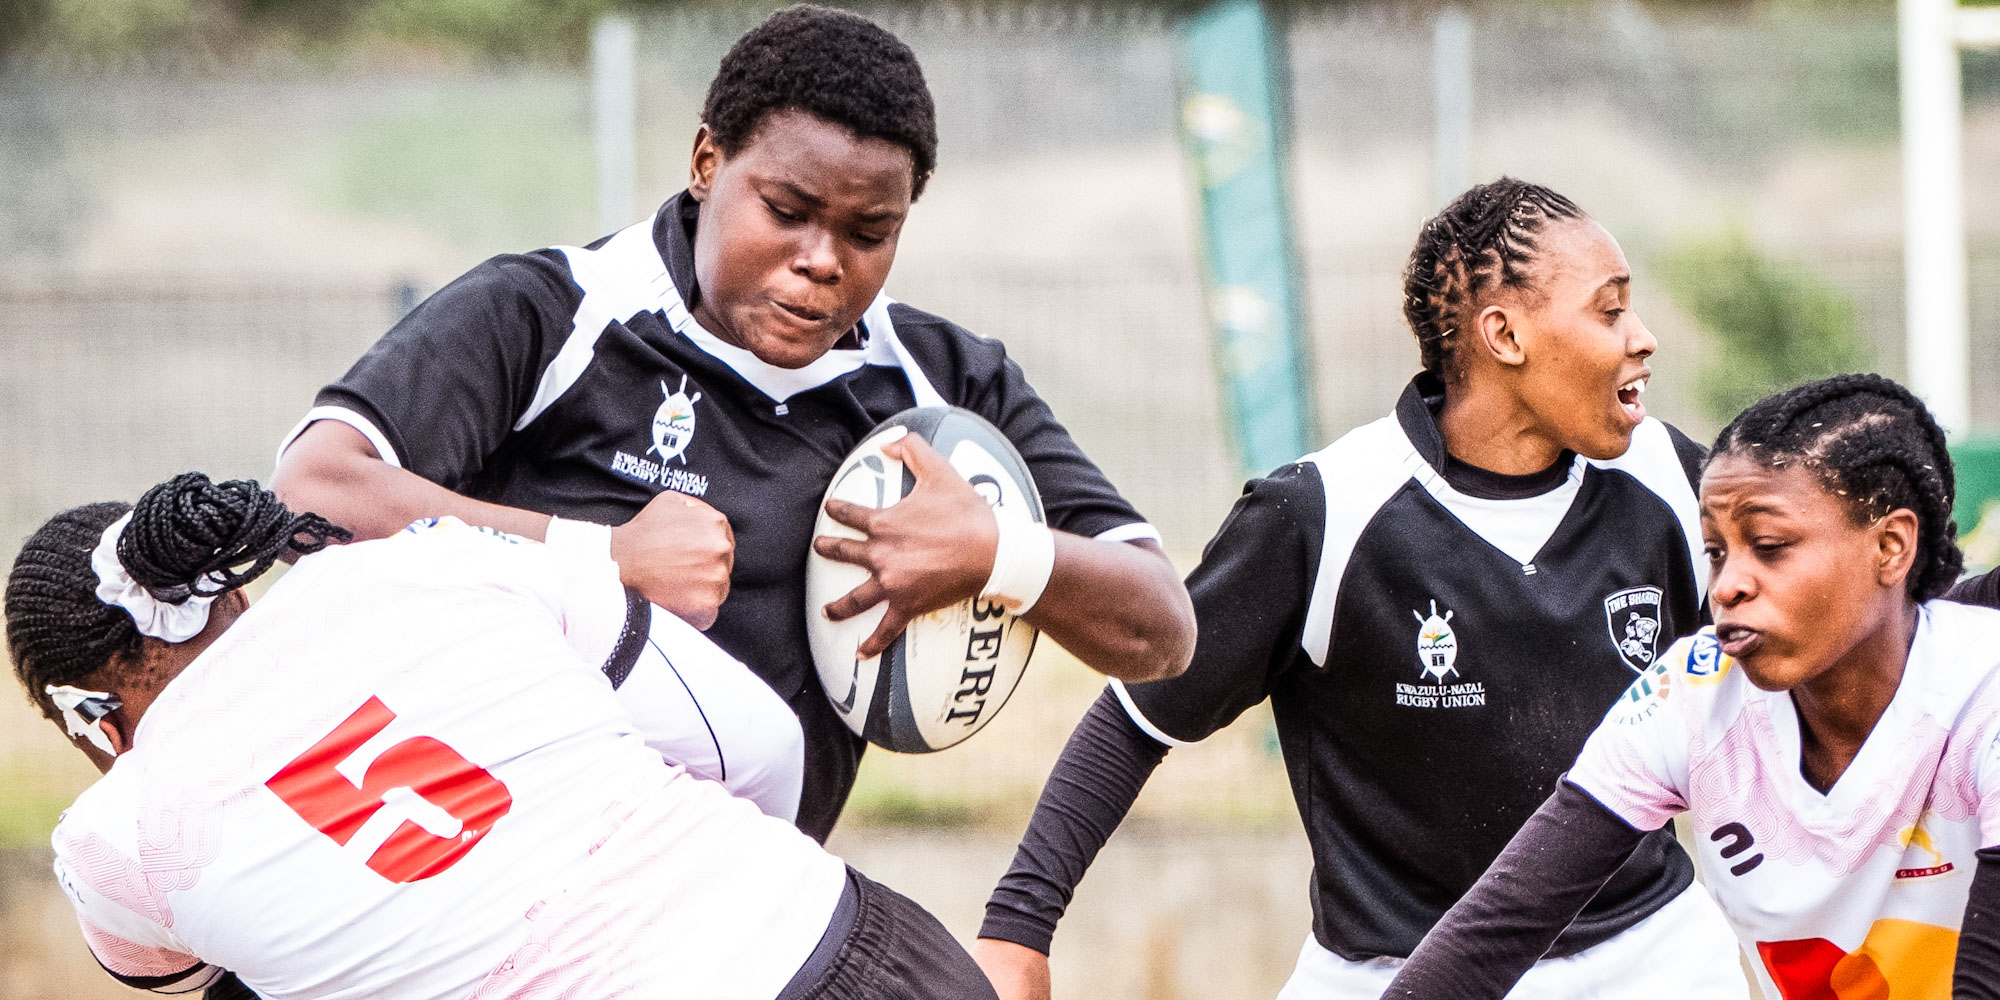 The Golden Lions stopped the Sharks in their tracks on Wednesday.